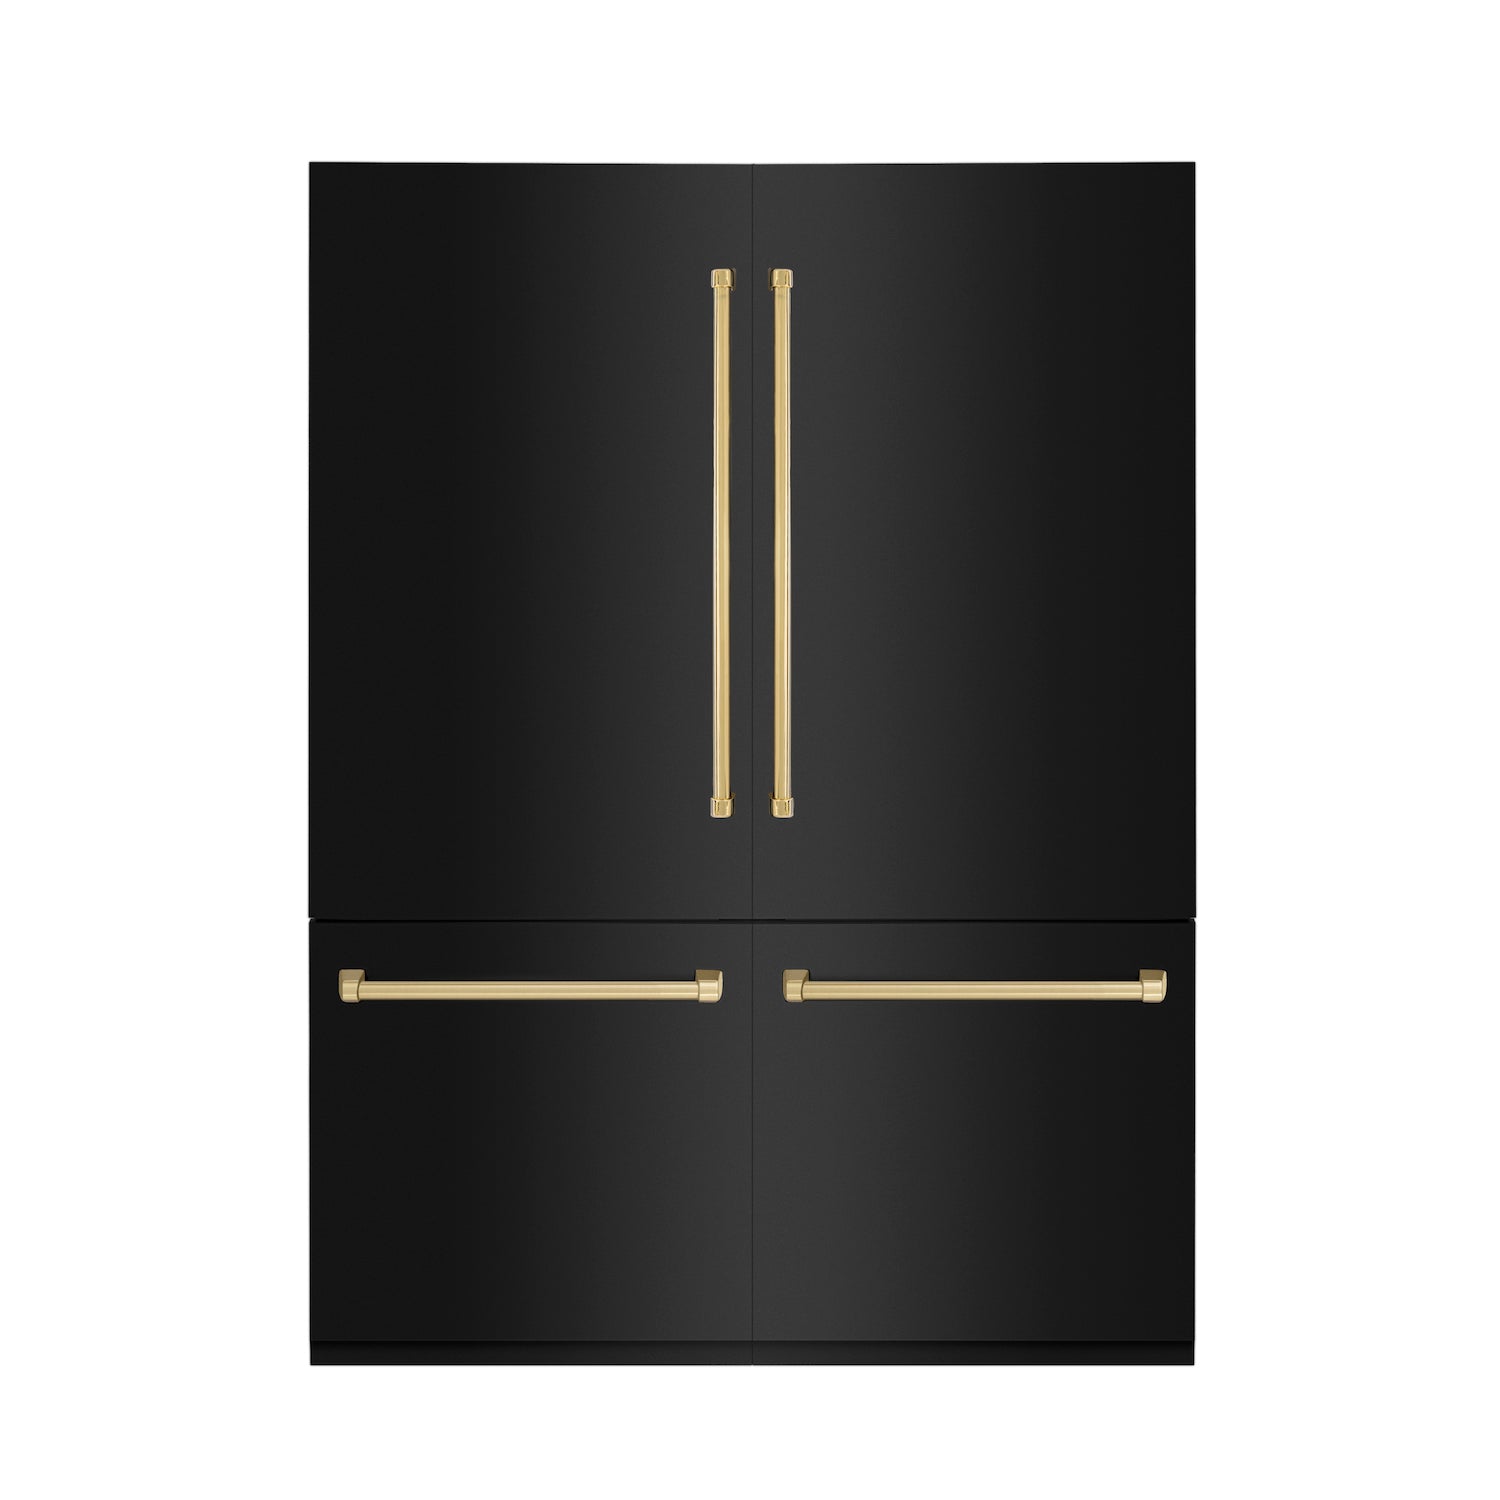 ZLINE 60 in. Autograph Edition 32.2 cu. ft. Built-in 4-Door French Door Refrigerator with Internal Water and Ice Dispenser in Black Stainless Steel with Polished Gold Accents (RBIVZ-BS-60-G)front.